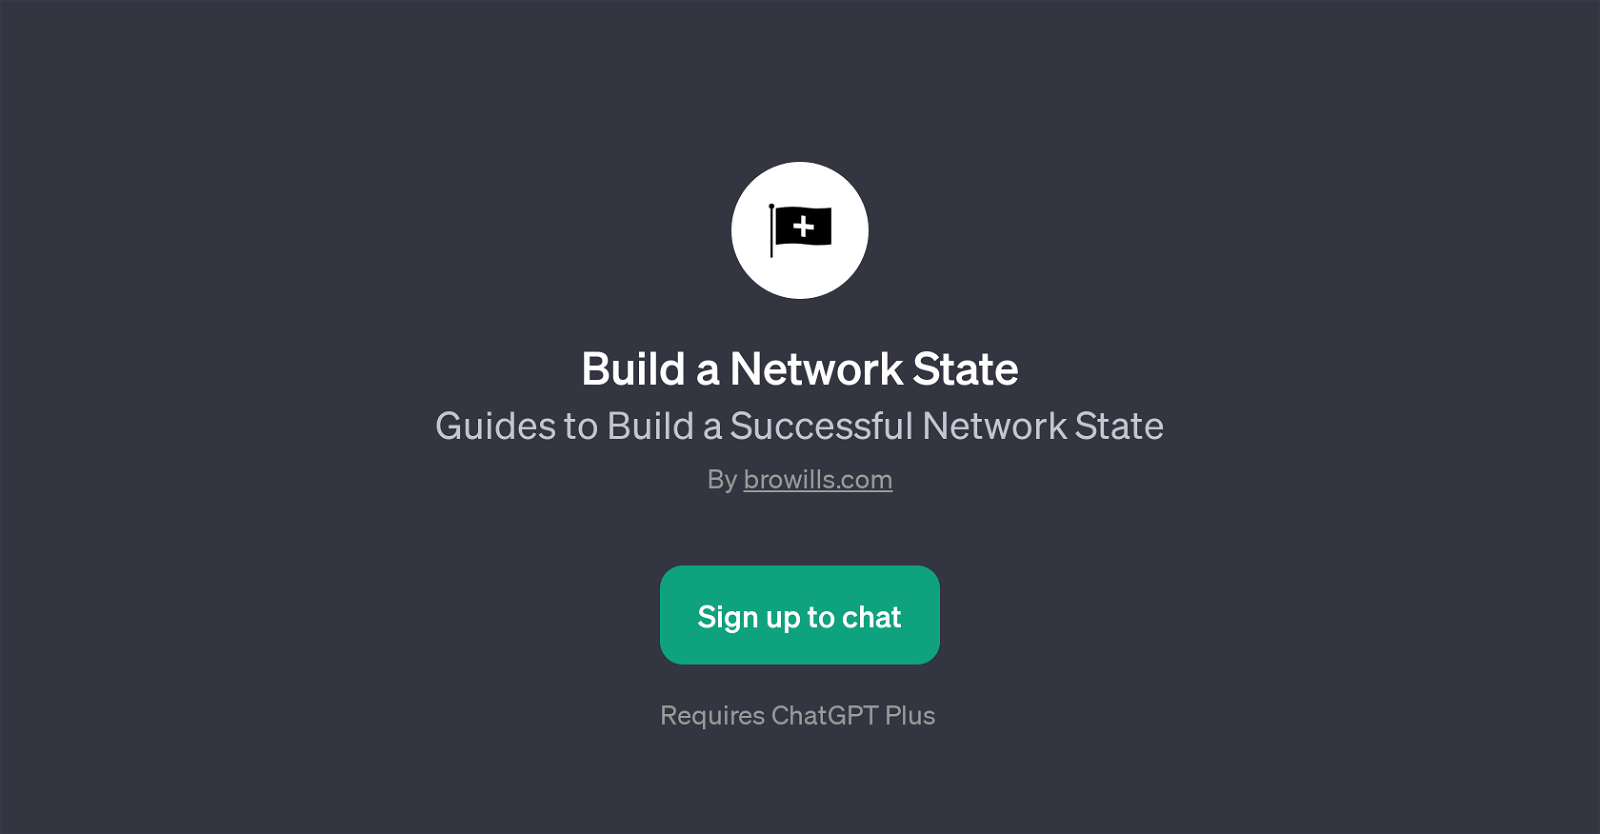 Build a Network State website